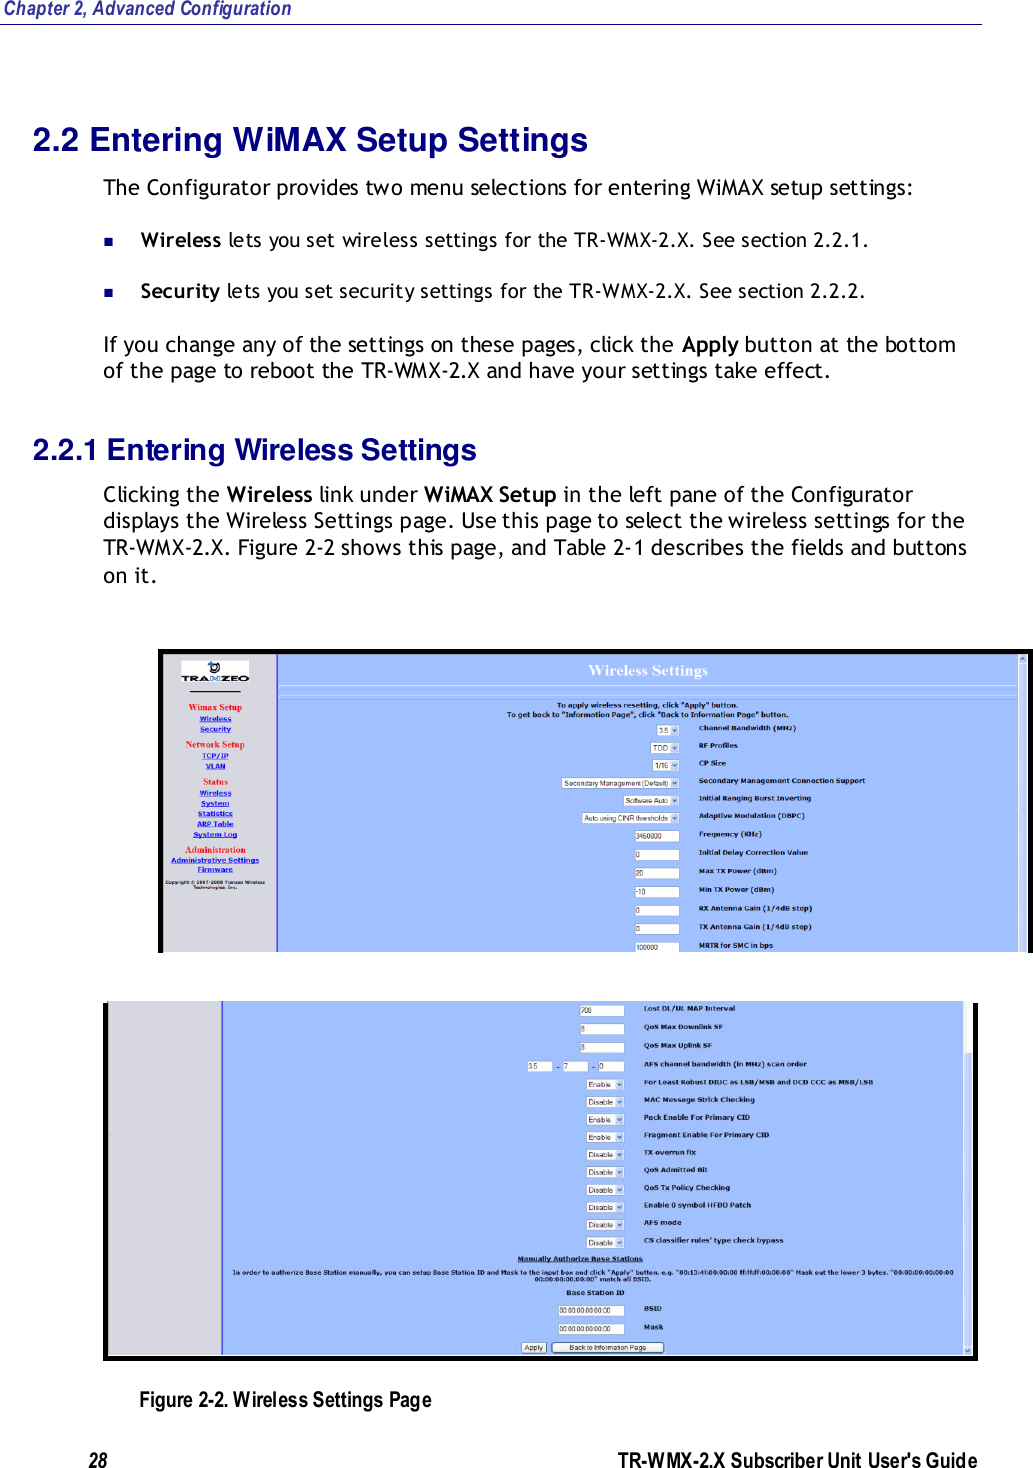 Chapter 2, Advanced Configuration 28               TR-WMX-2.X Subscriber Unit User&apos;s Guide  2.2 Entering WiMAX Setup Settings The Configurator provides two menu selections for entering WiMAX setup settings:  Wireless lets you set wireless settings for the TR-WMX-2.X. See section 2.2.1.  Security lets you set security settings for the TR-WMX-2.X. See section 2.2.2. If you change any of the settings on these pages, click the Apply button at the bottom of the page to reboot the TR-WMX-2.X and have your settings take effect. 2.2.1 Entering Wireless Settings Clicking the Wireless link under WiMAX Setup in the left pane of the Configurator displays the Wireless Settings page. Use this page to select the wireless settings for the TR-WMX-2.X. Figure 2-2 shows this page, and Table 2-1 describes the fields and buttons on it.   Figure 2-2. Wireless Settings Page 